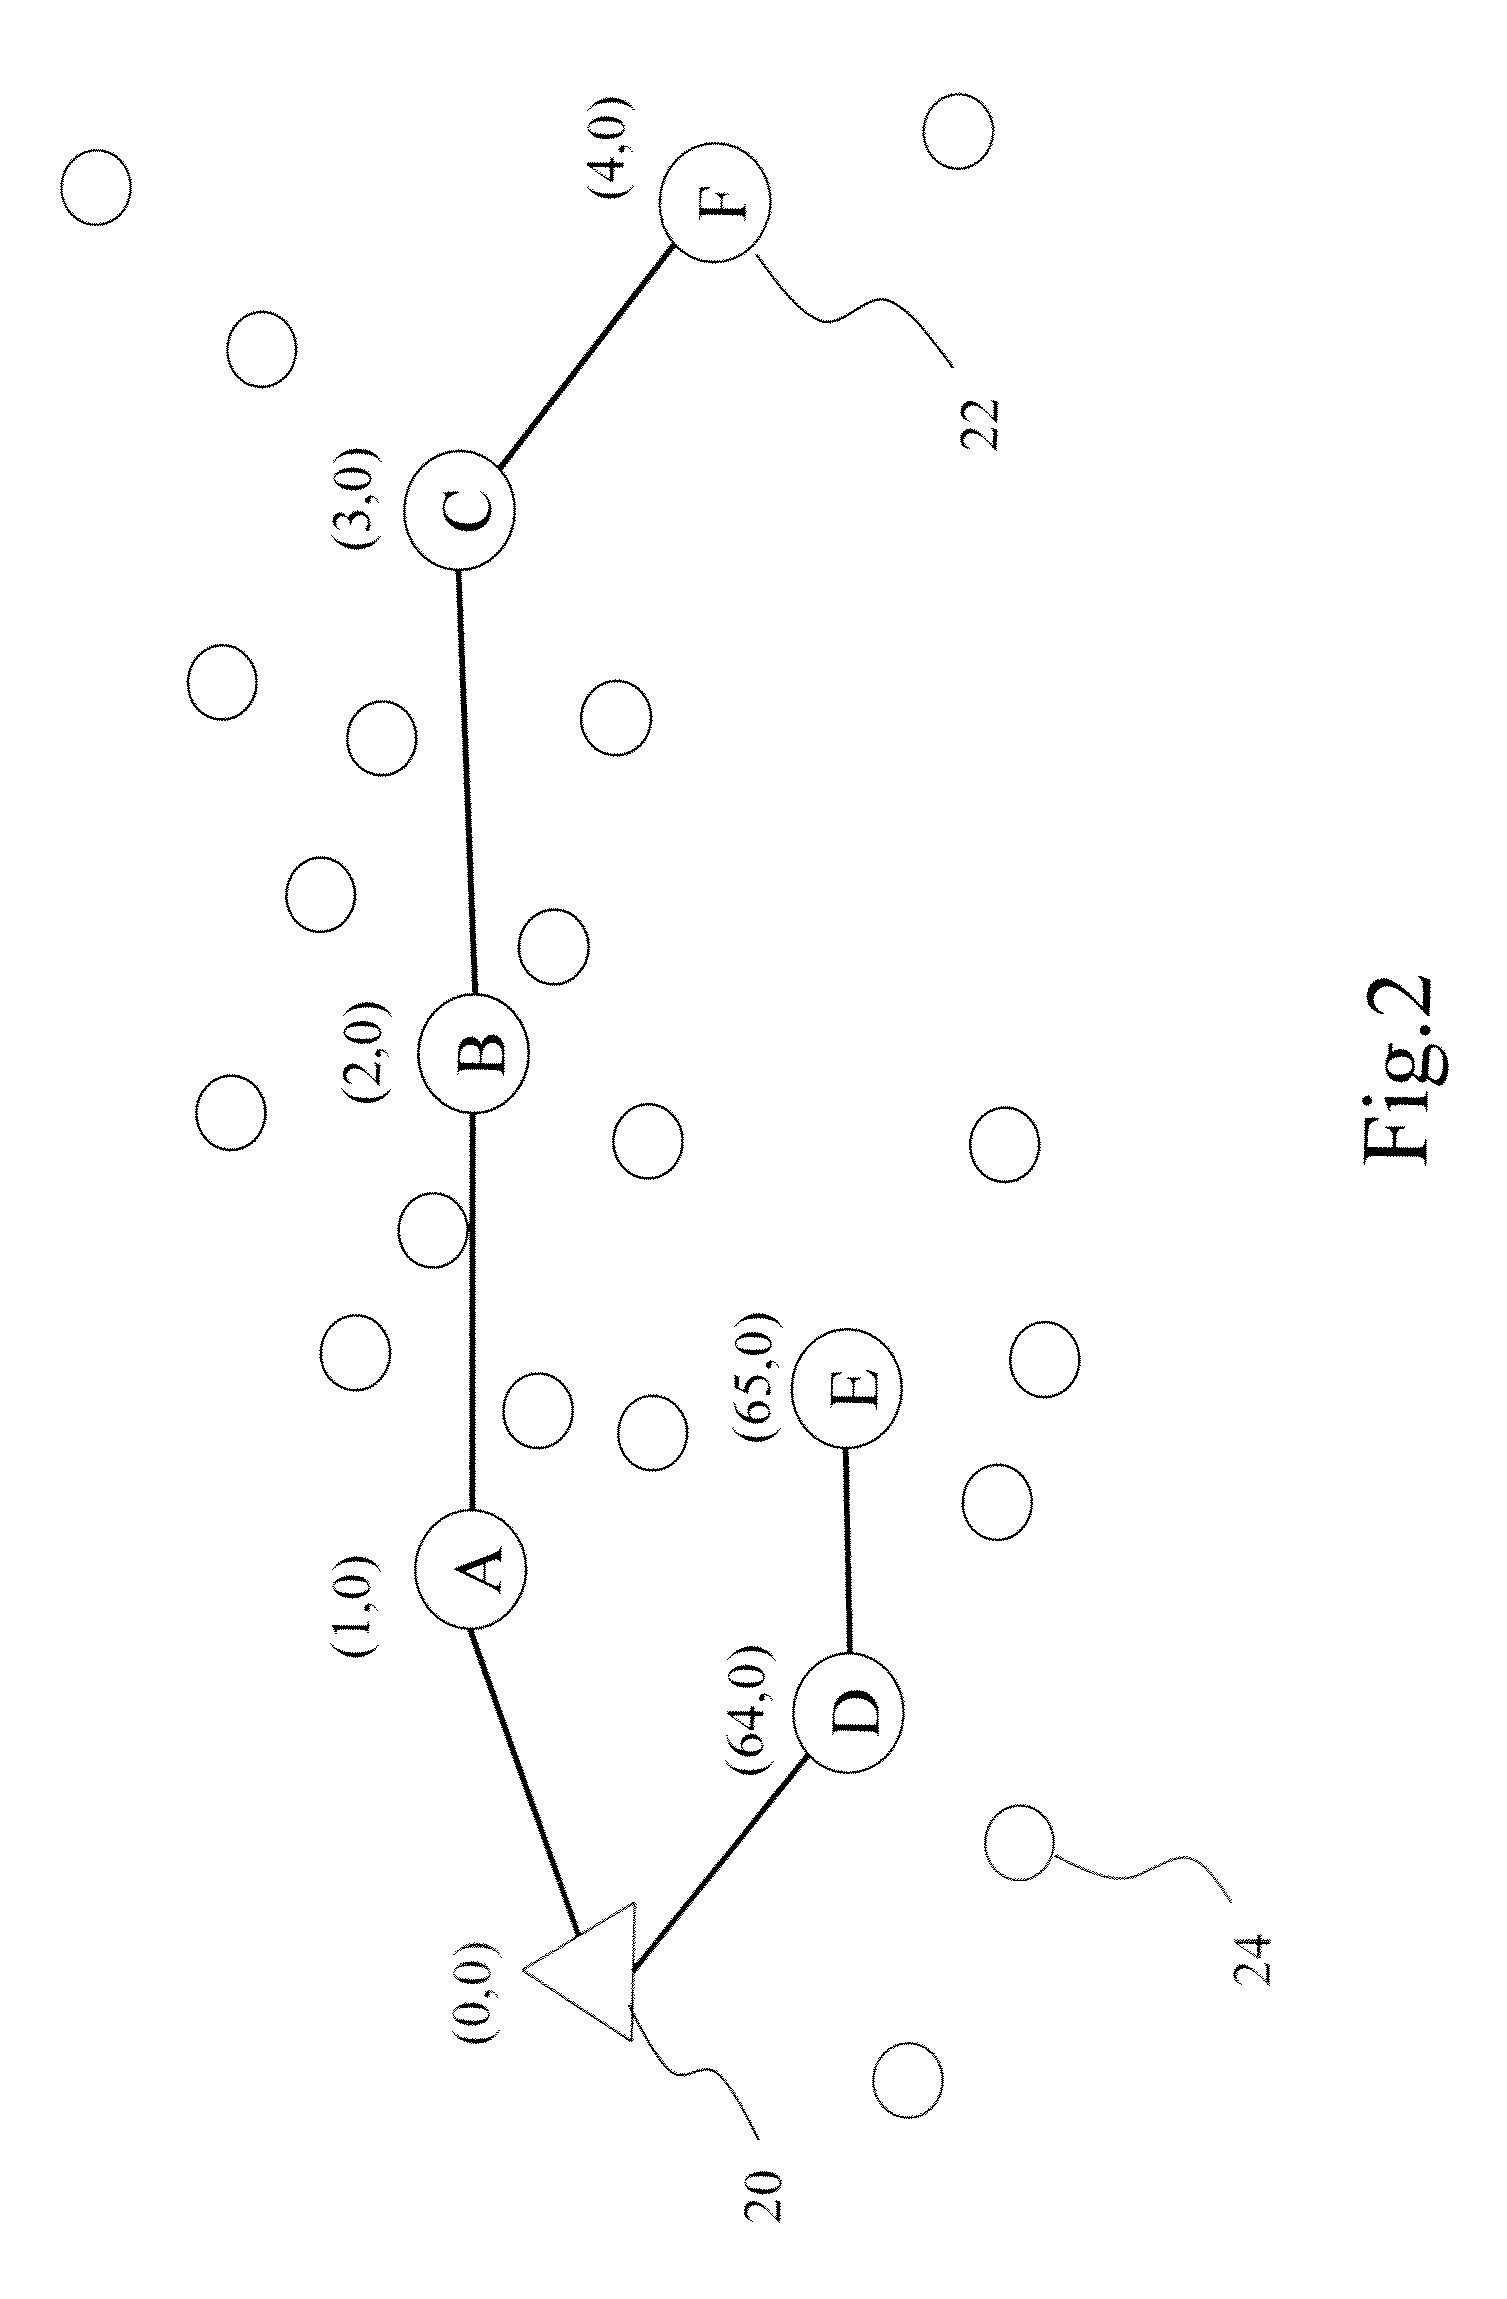 Power-efficient backbone-oriented wireless sensor network, method for constructing the same and method for repairing the same